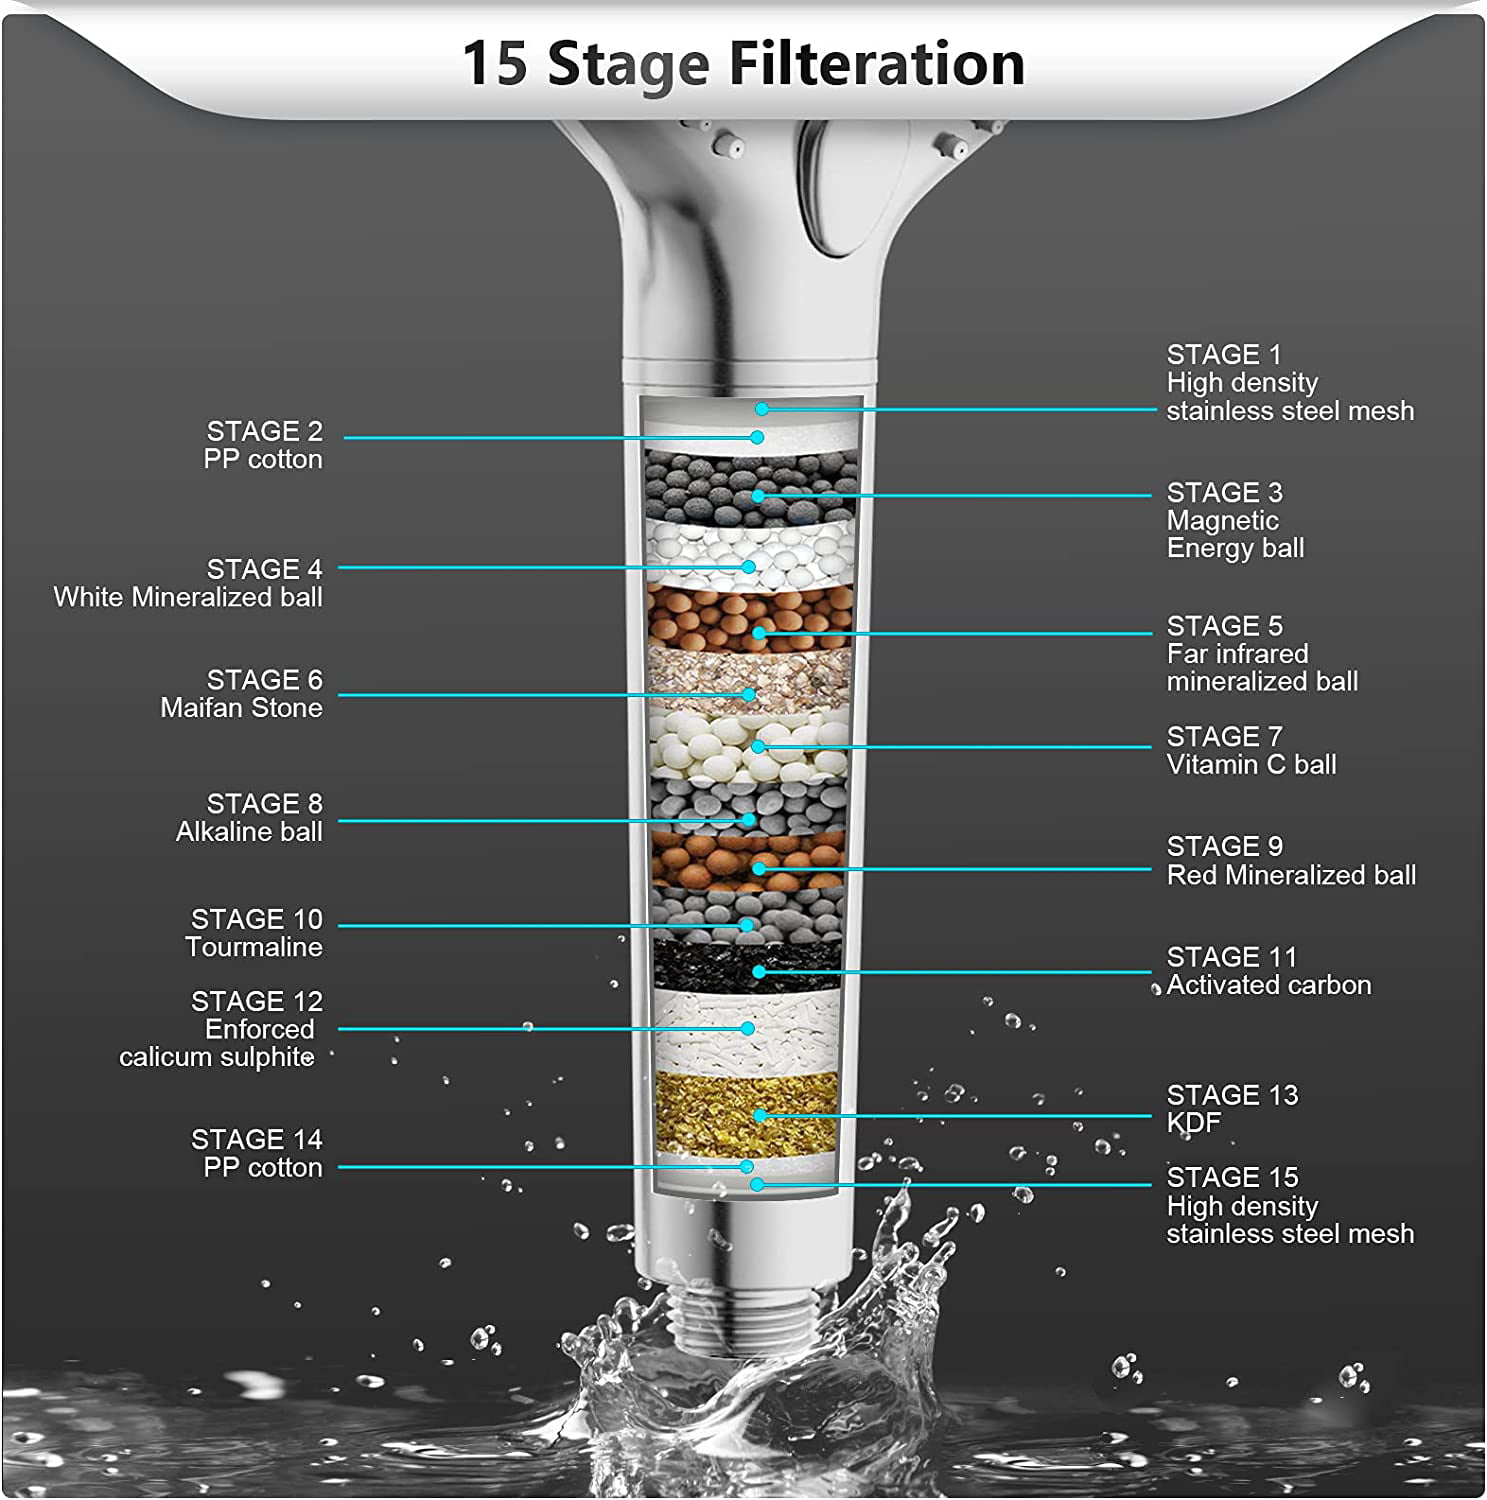 STHOEO Filtered Shower Head, 5 Modes High Pressure Shower Head with filters, 15 Stage Hard Water